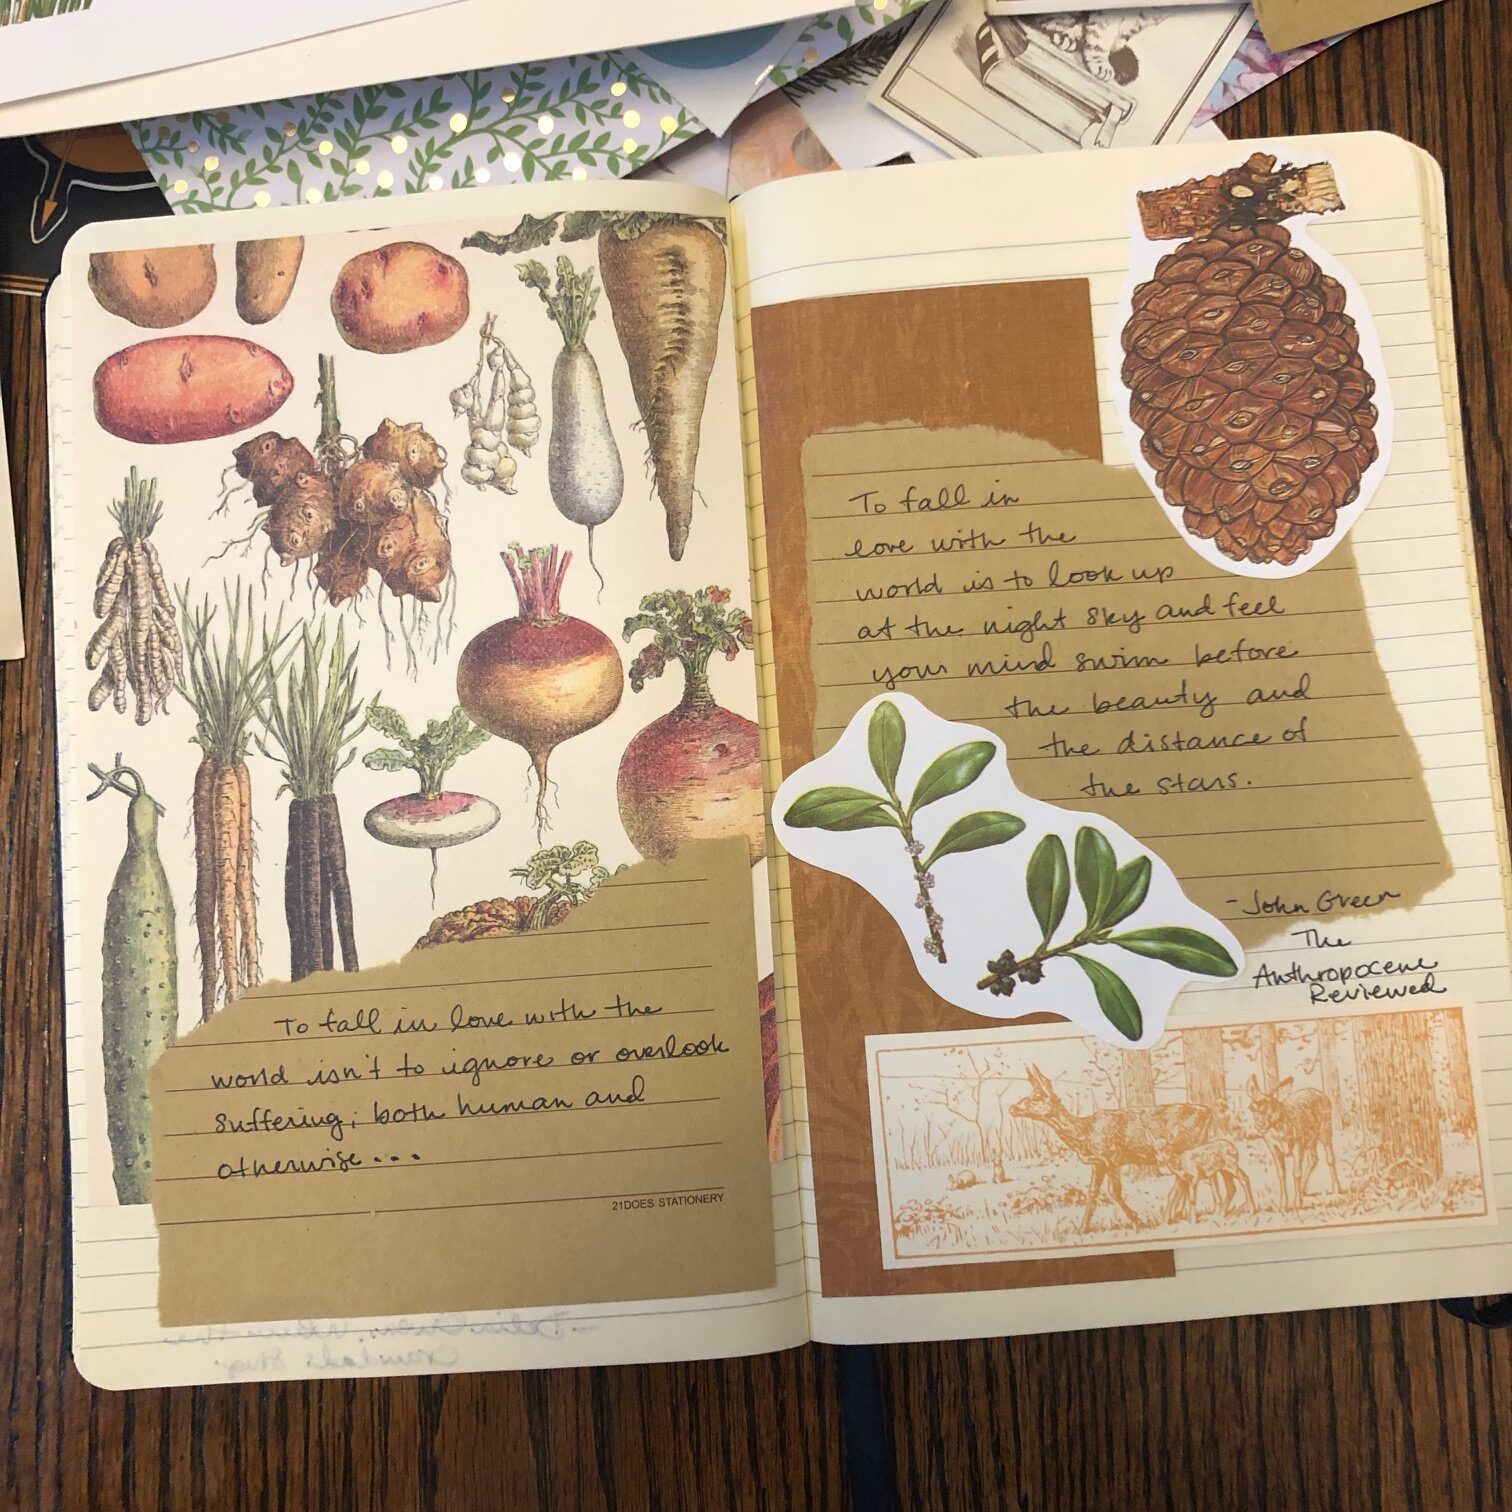 (Photo by Cassie Gutman)

Image of a full journal spread, with a background paper of carrots and turnips with lined paper pasted on top, with a quote from The Anthropocene Reviewed. The pages also have cutouts of plants, pinecones, and a deer on them. 